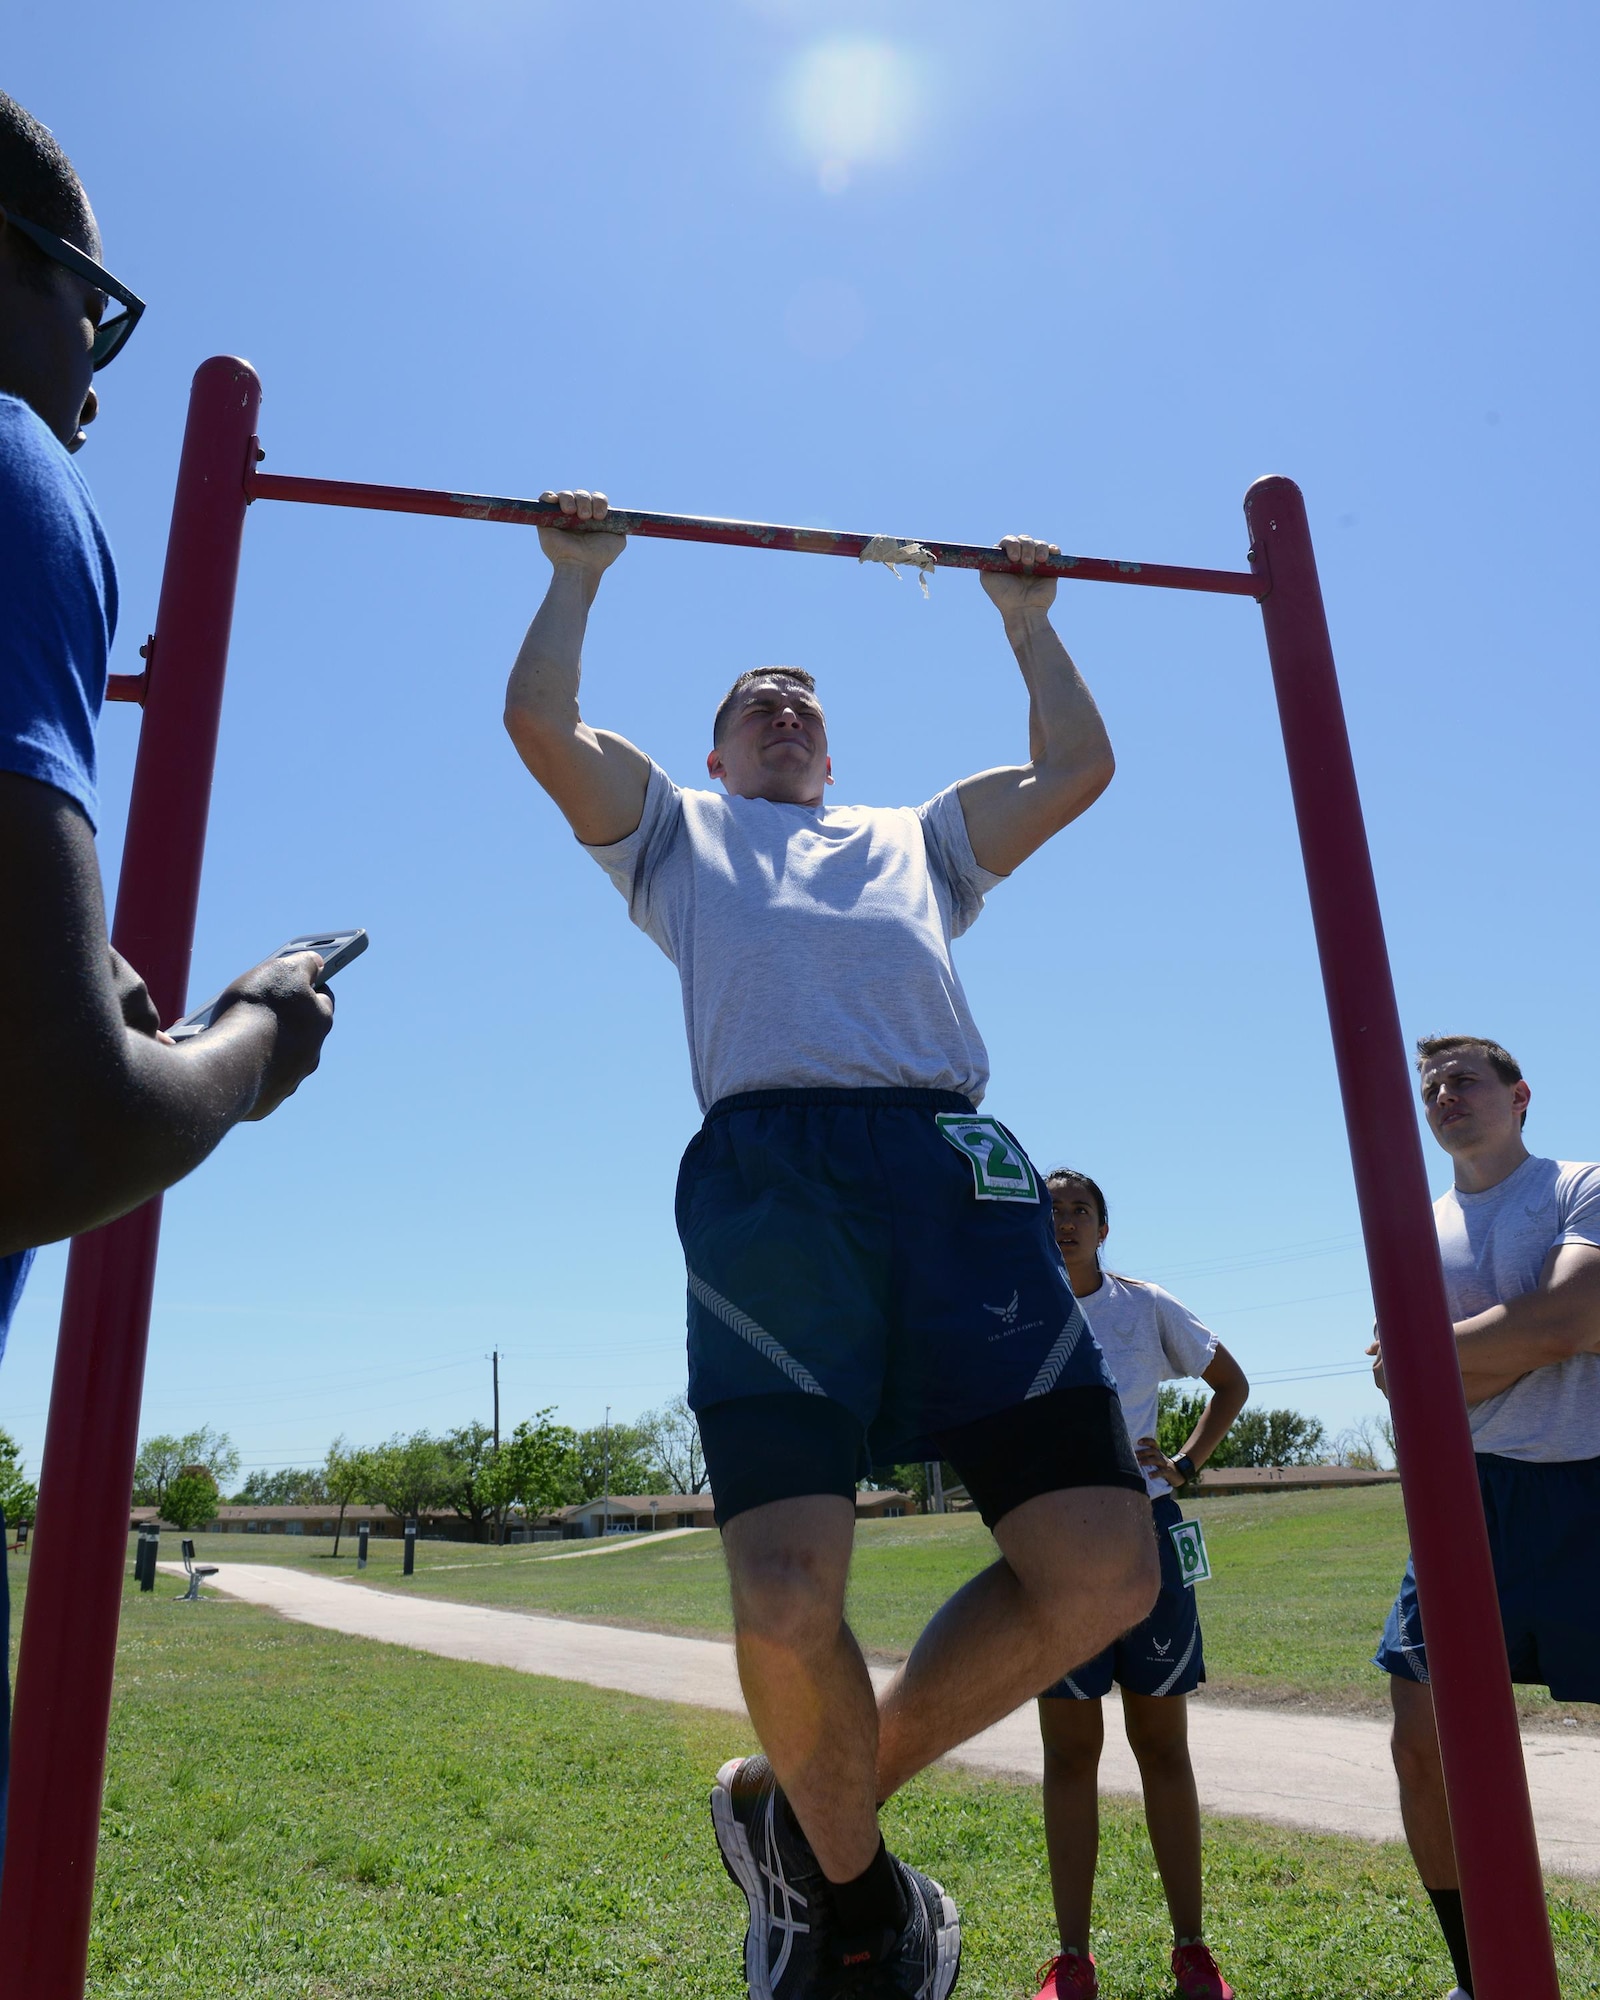 2nd Lt. Kyle Flynn, 47th Student Squadron awaiting pilot training, performs pull-ups at Laughlin Air Force Base, Texas, April 5, 2016. One station during the Warrior Games involved calisthenics to include pull-ups, sit-ups and push-ups. (U.S. Air Force photo by Senior Airman Jimmie D. Pike)